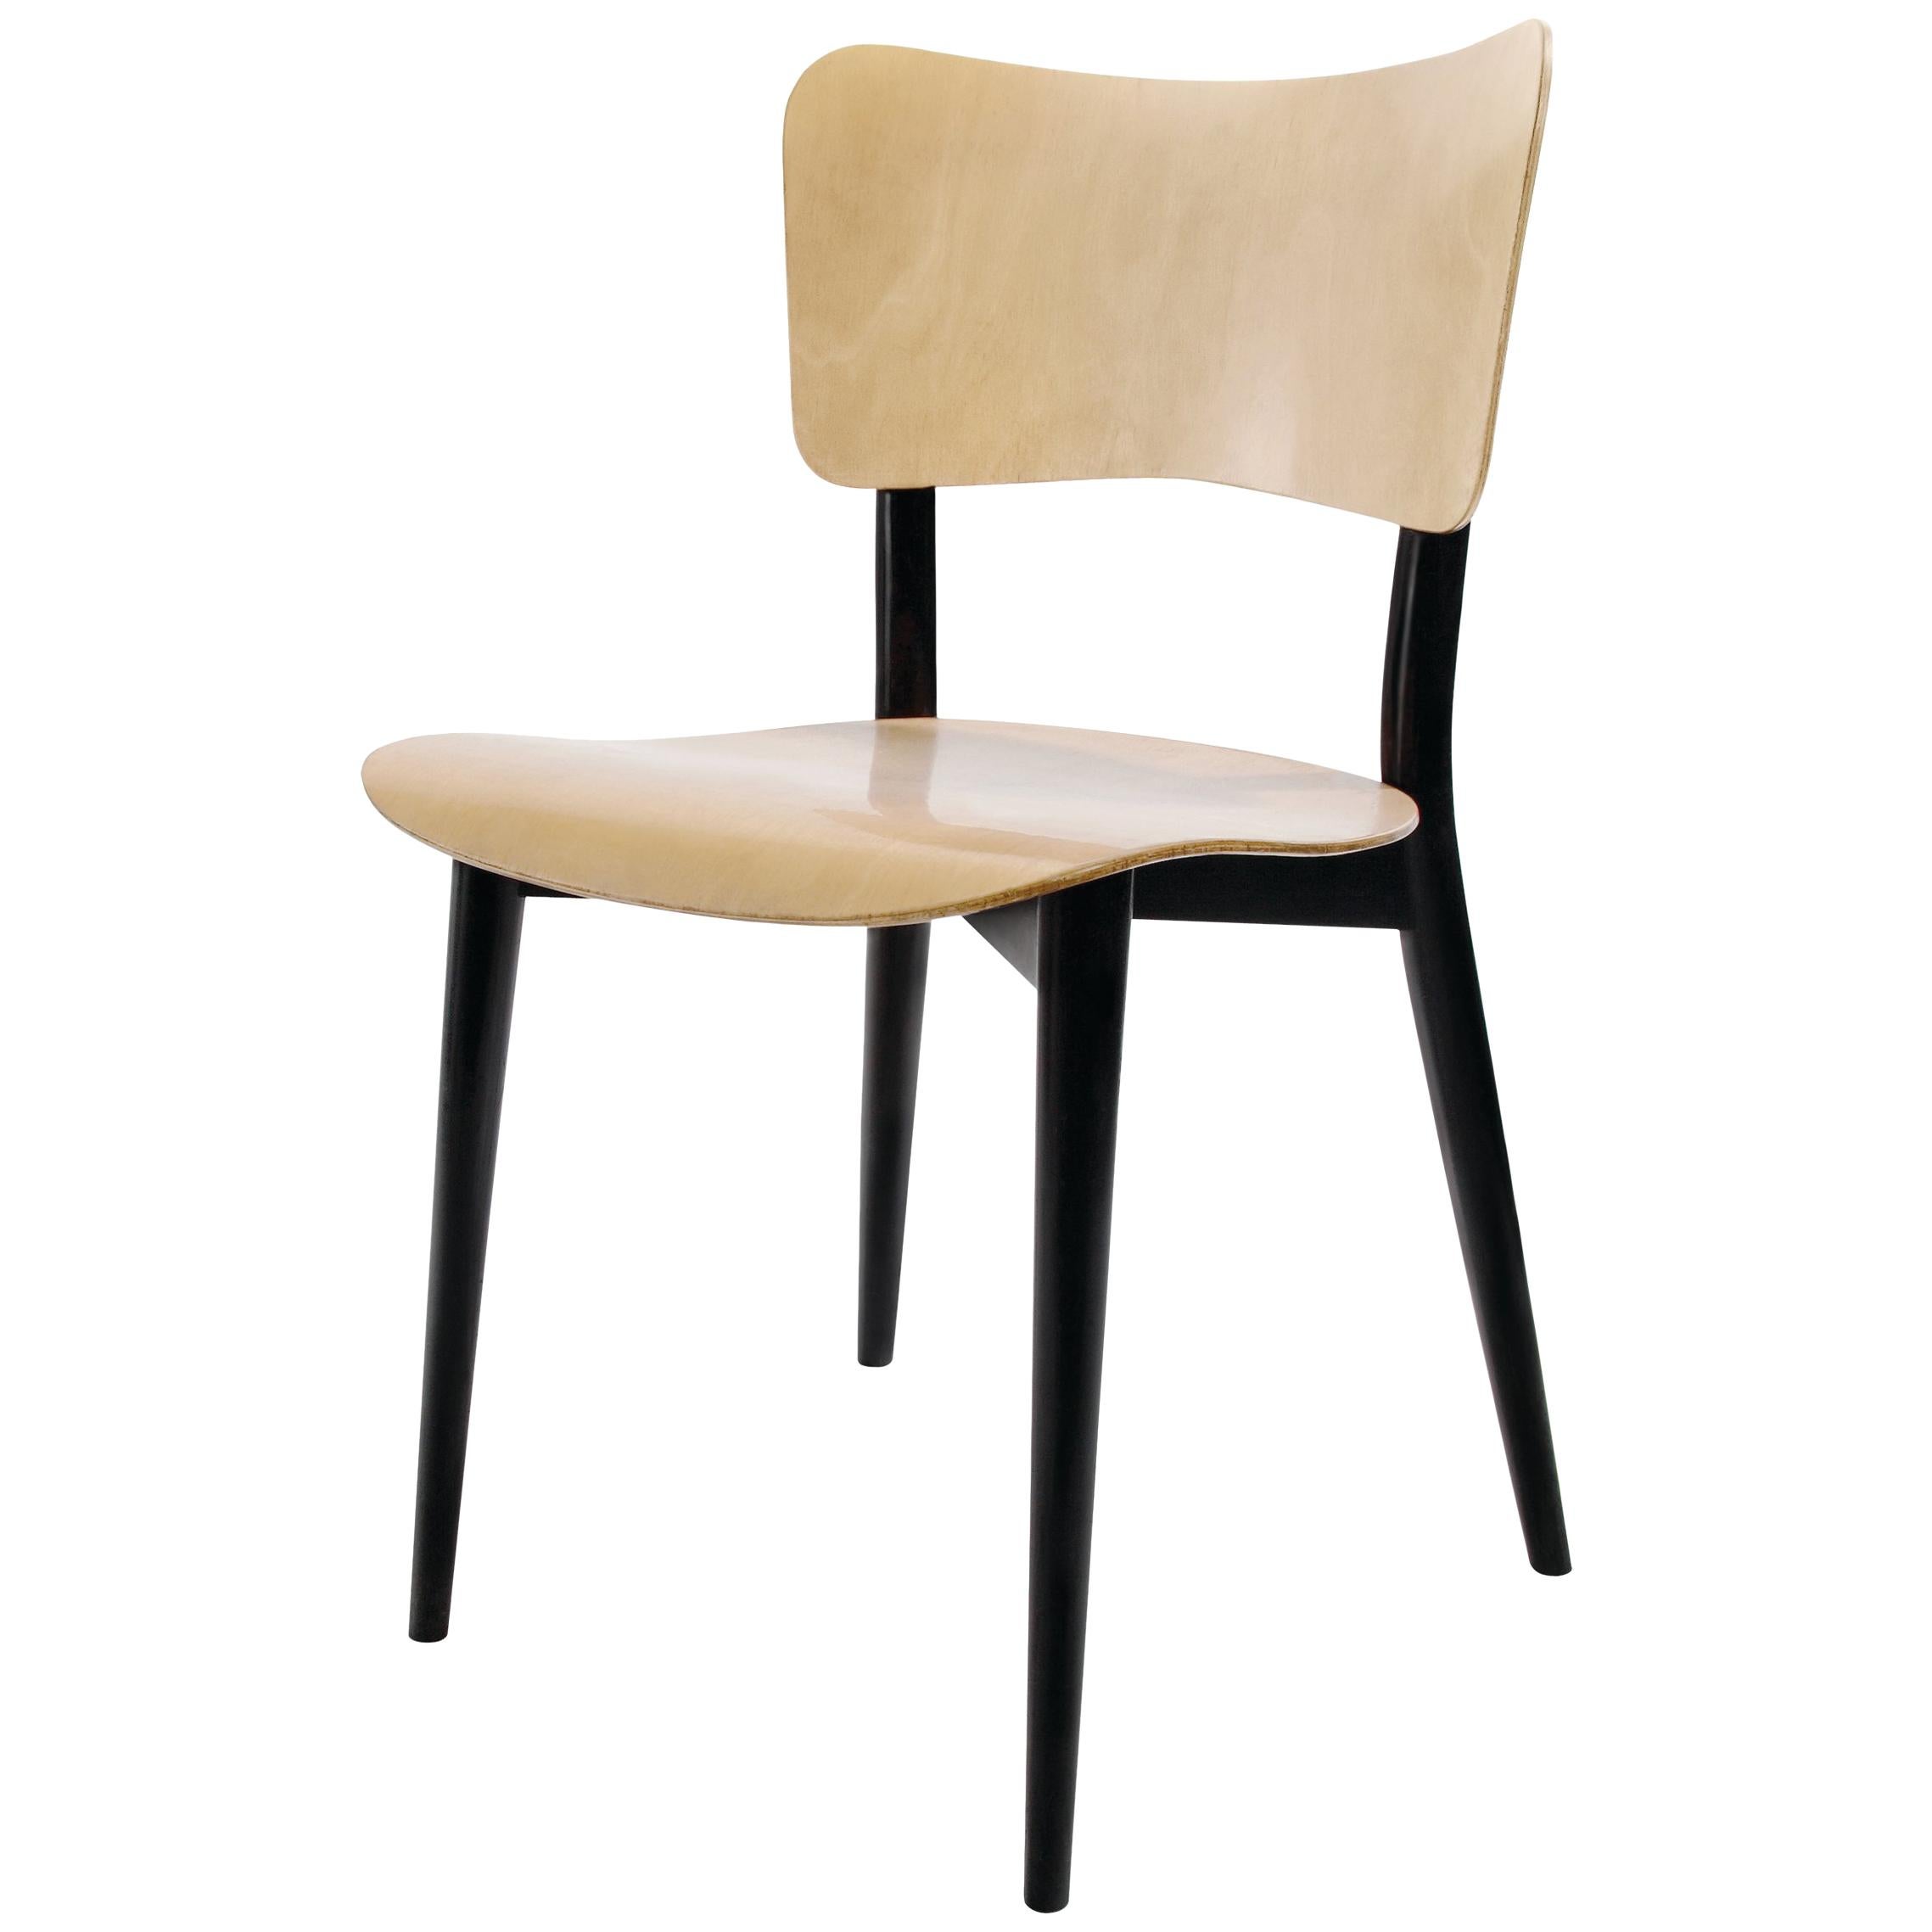 Max Bill Cross Frame Chair, Black Beech Frame/Natural Birch Plywood Seat&Back For Sale